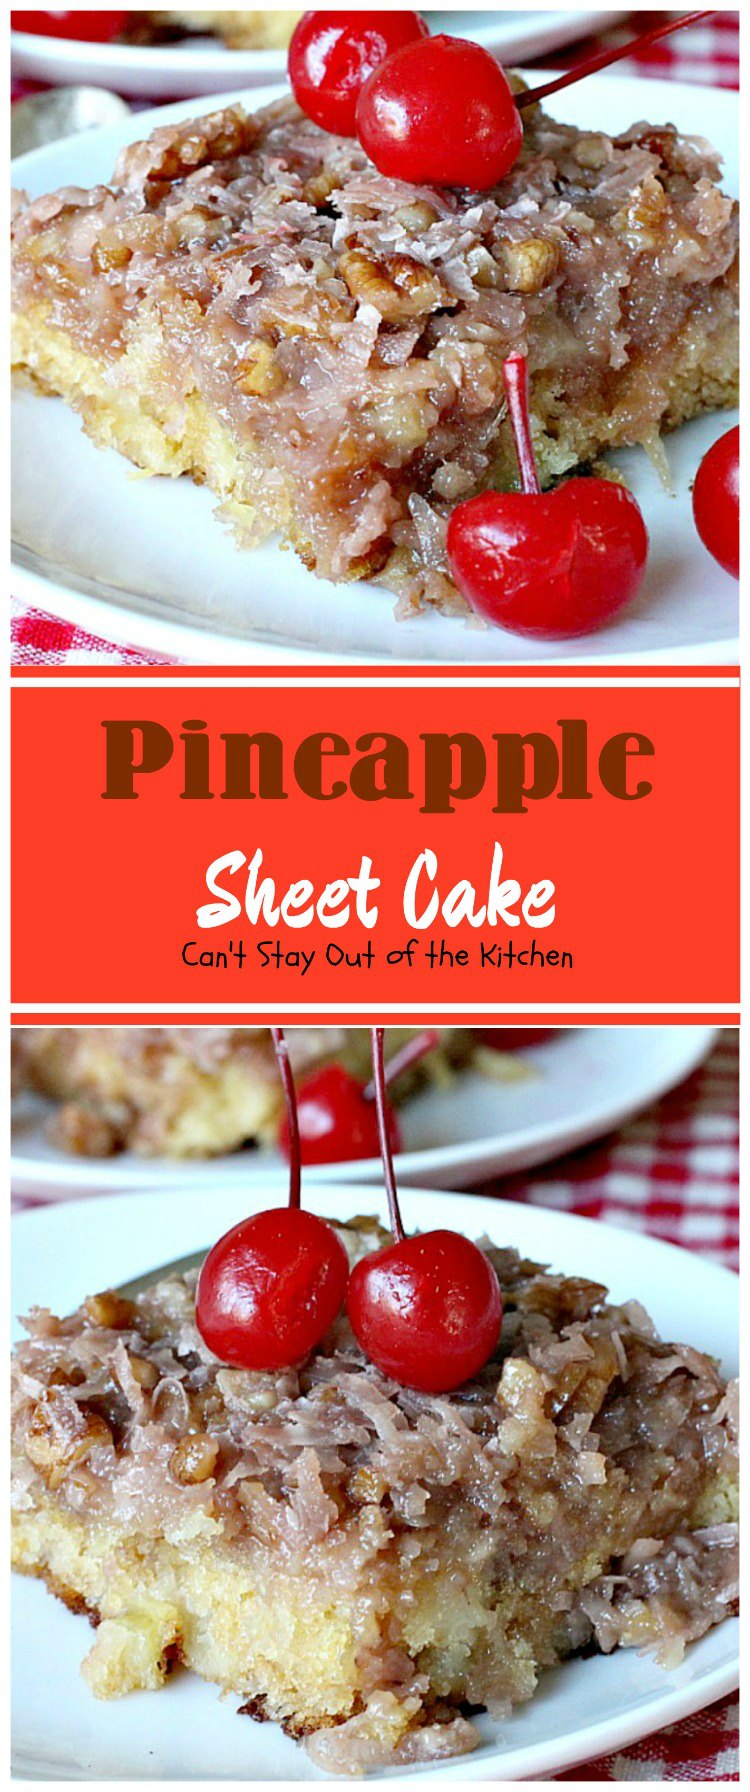 Pineapple Sheet Cake | Can't Stay Out of the Kitchen